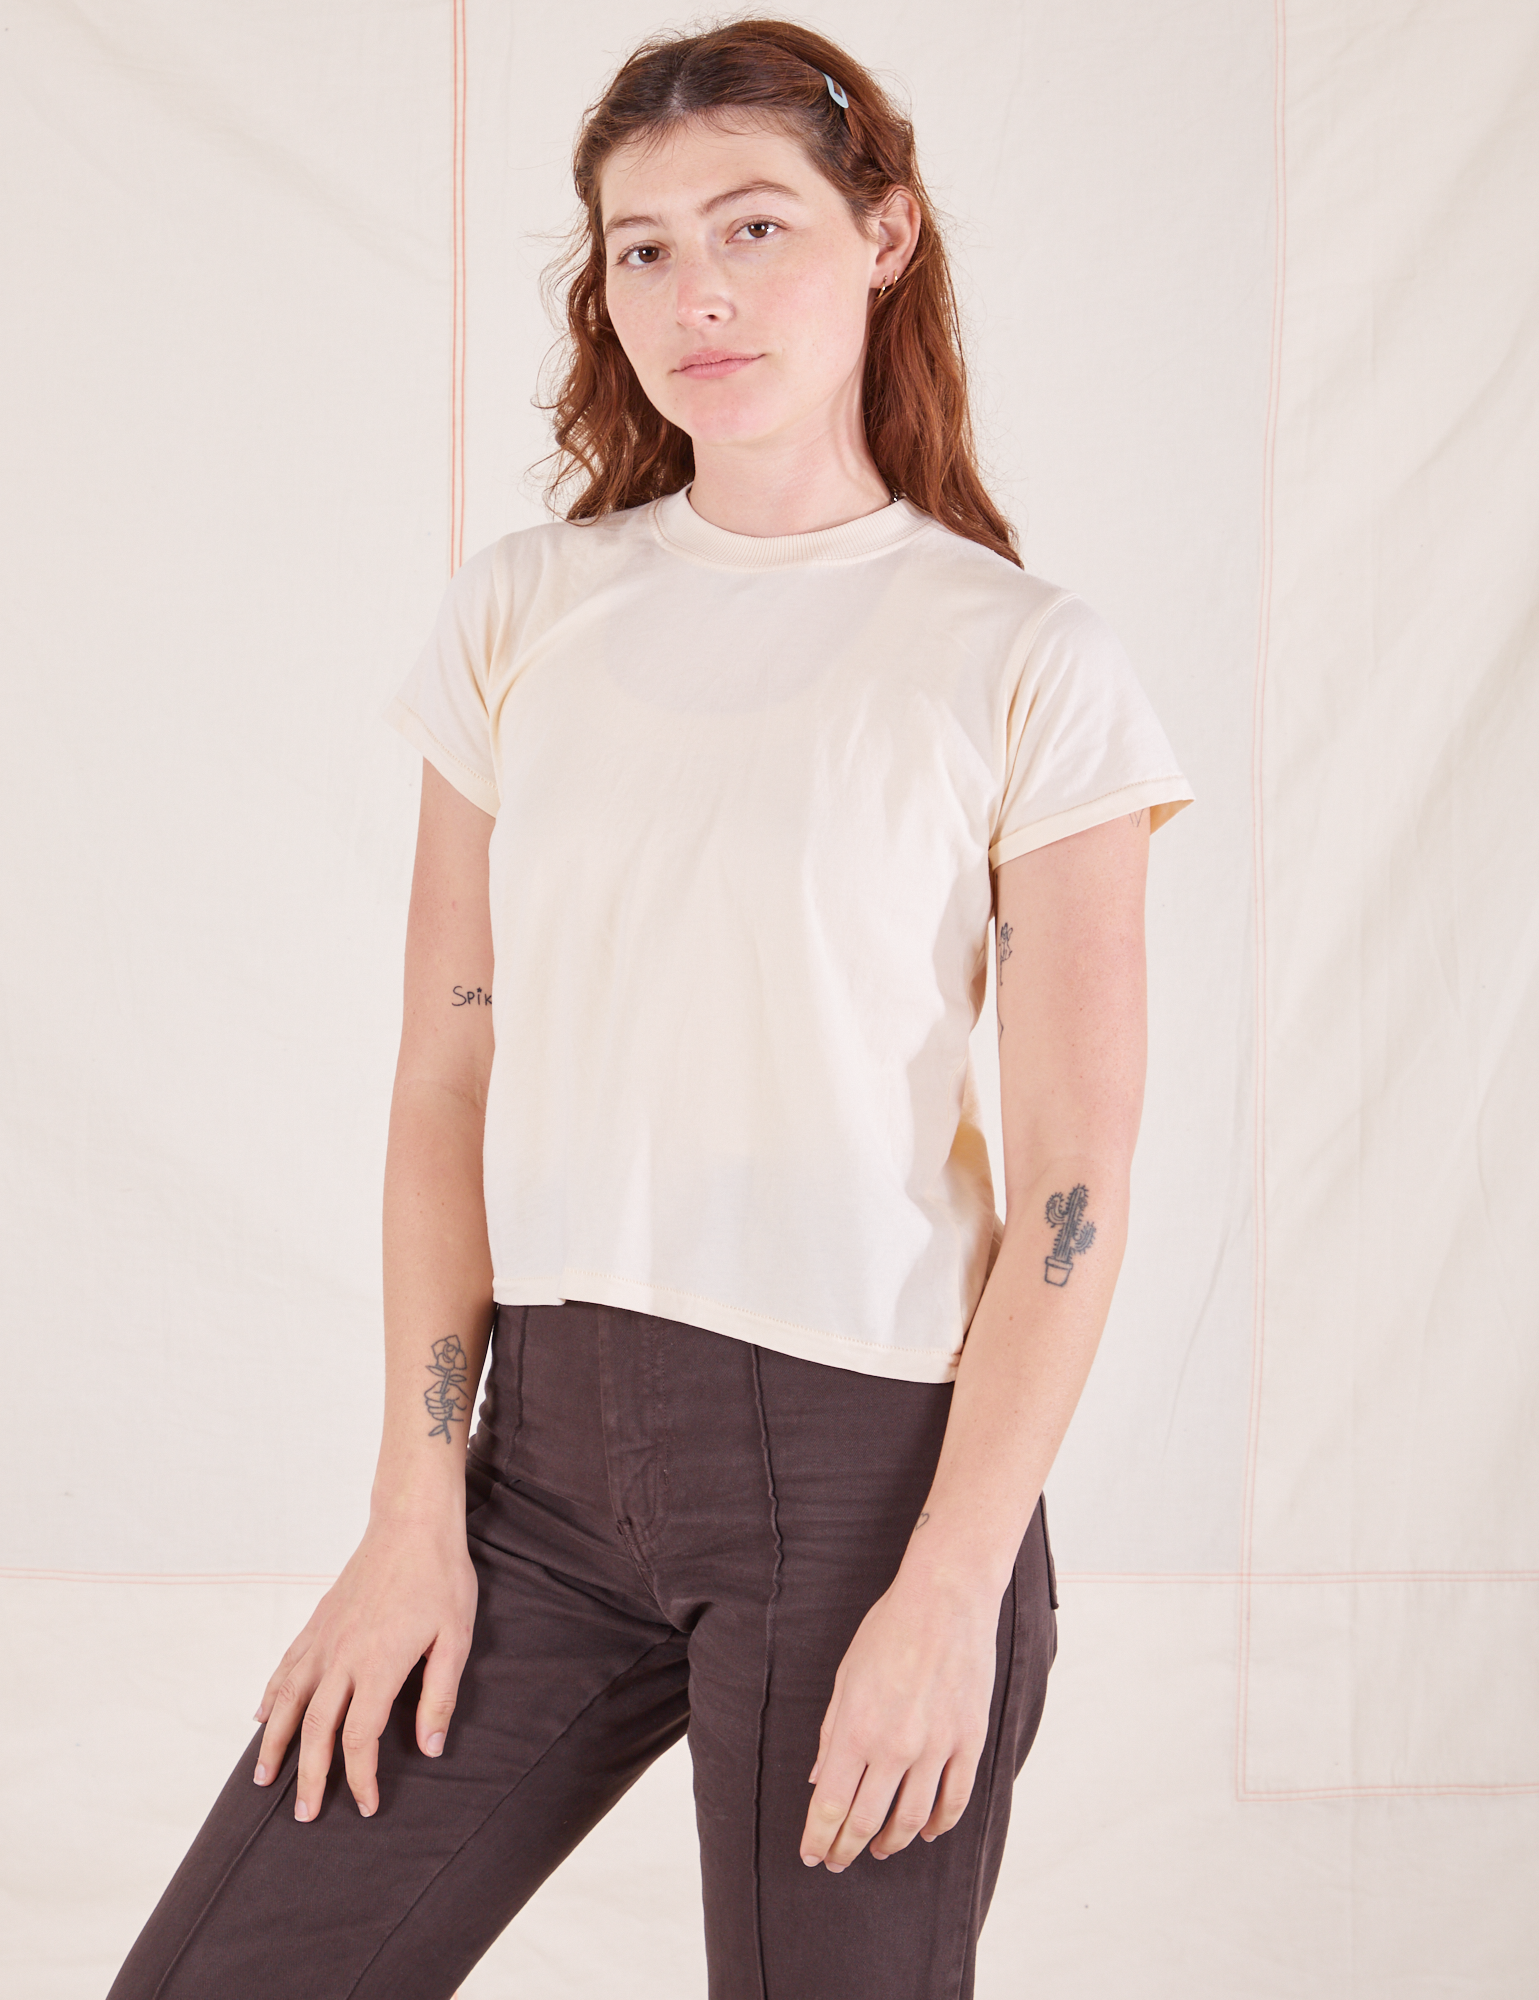 Alex is wearing Organic Vintage Tee in Sunshine Yellow and espresso brown Western Pants